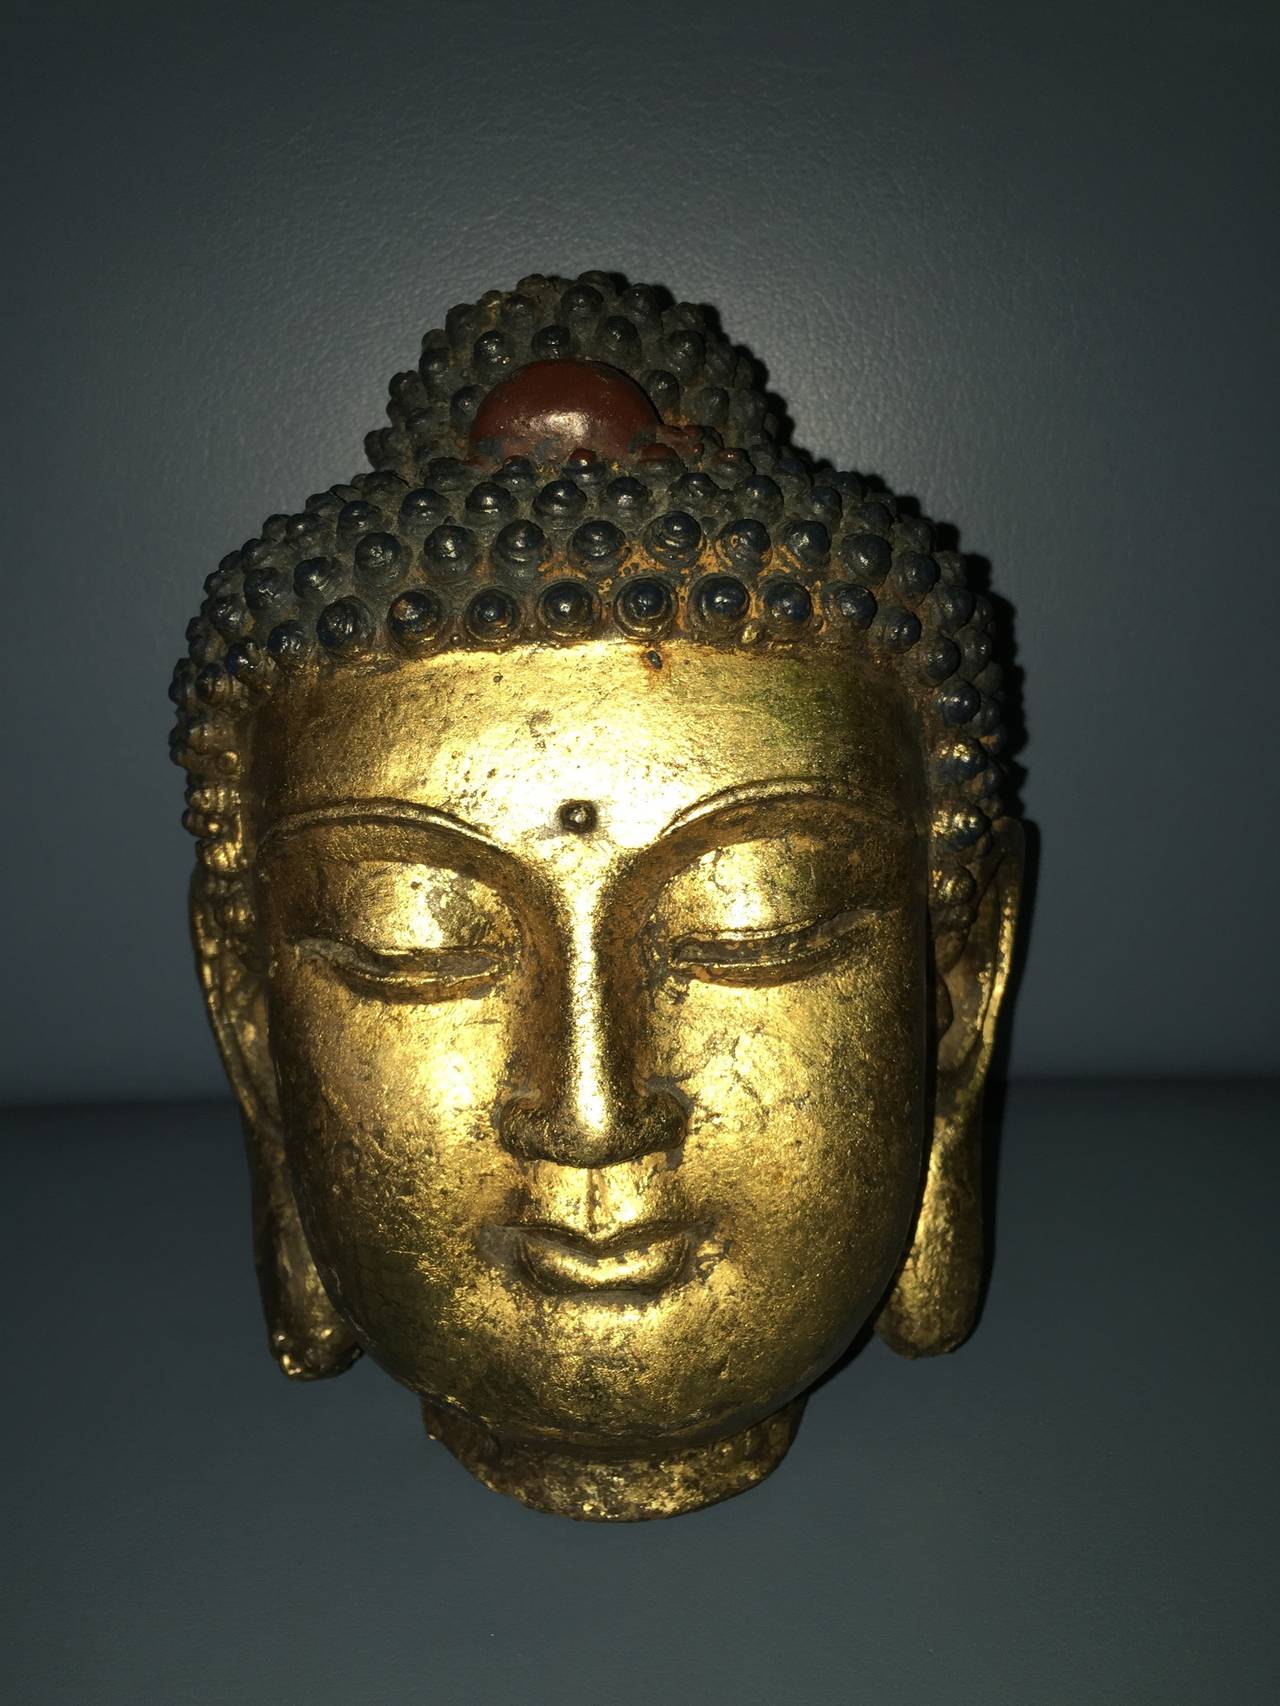 Terrific Mid-Century gold gilded Buddha head sculpture. Comprised of an iron material in the form of a Buddha with gold gilded paint.